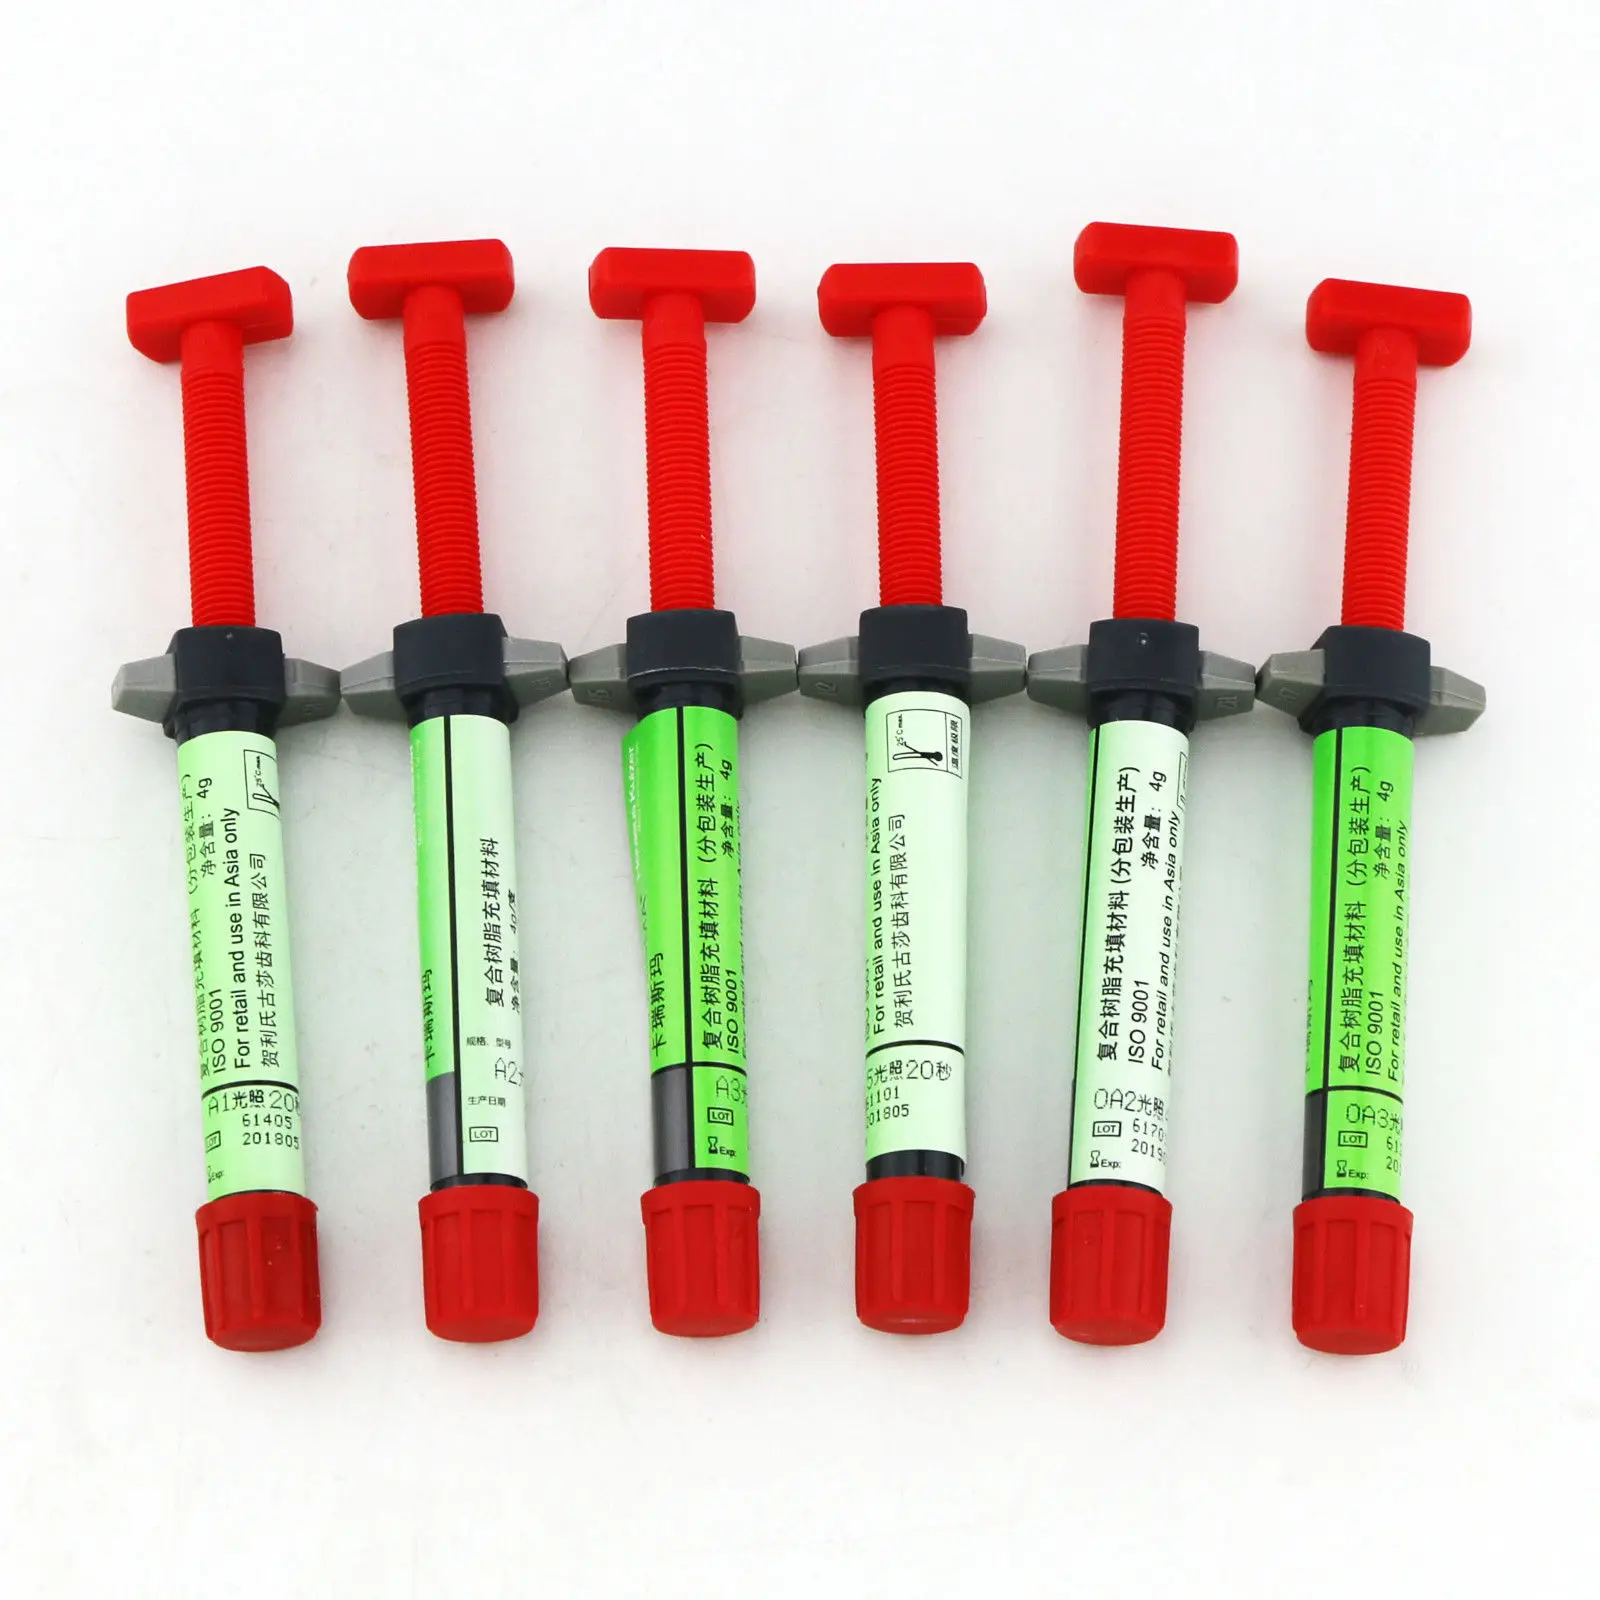 5Pcs Heraeus Charisma Dental Composite Syringe Light Cure Resin Tooth Filling Material A1 A2 A3 A3.5 Shade